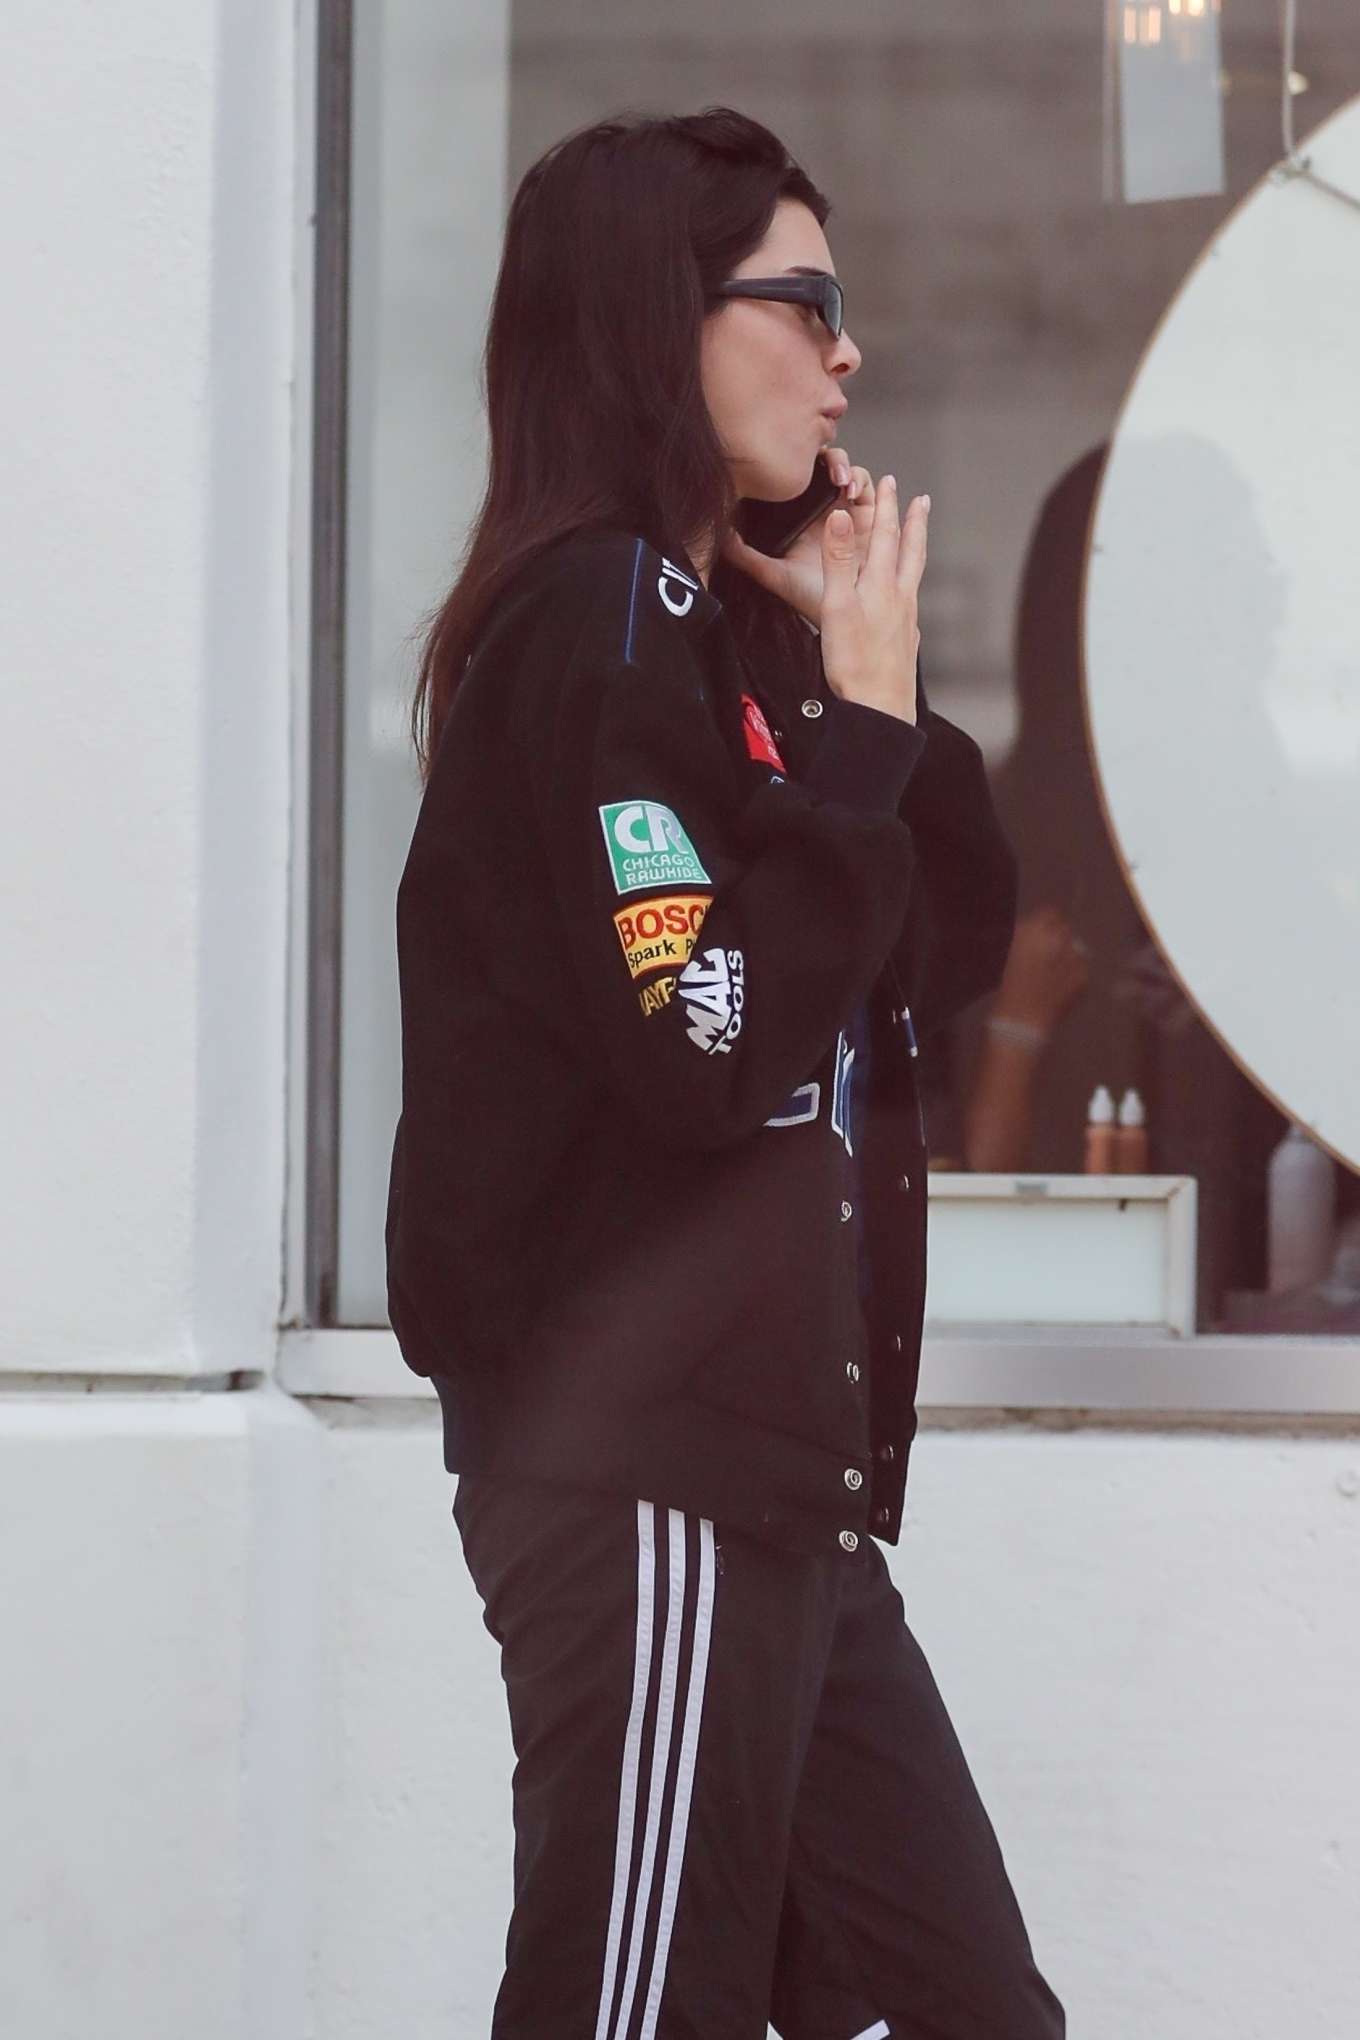 Kendall Jenner at Toast in West Hollywood